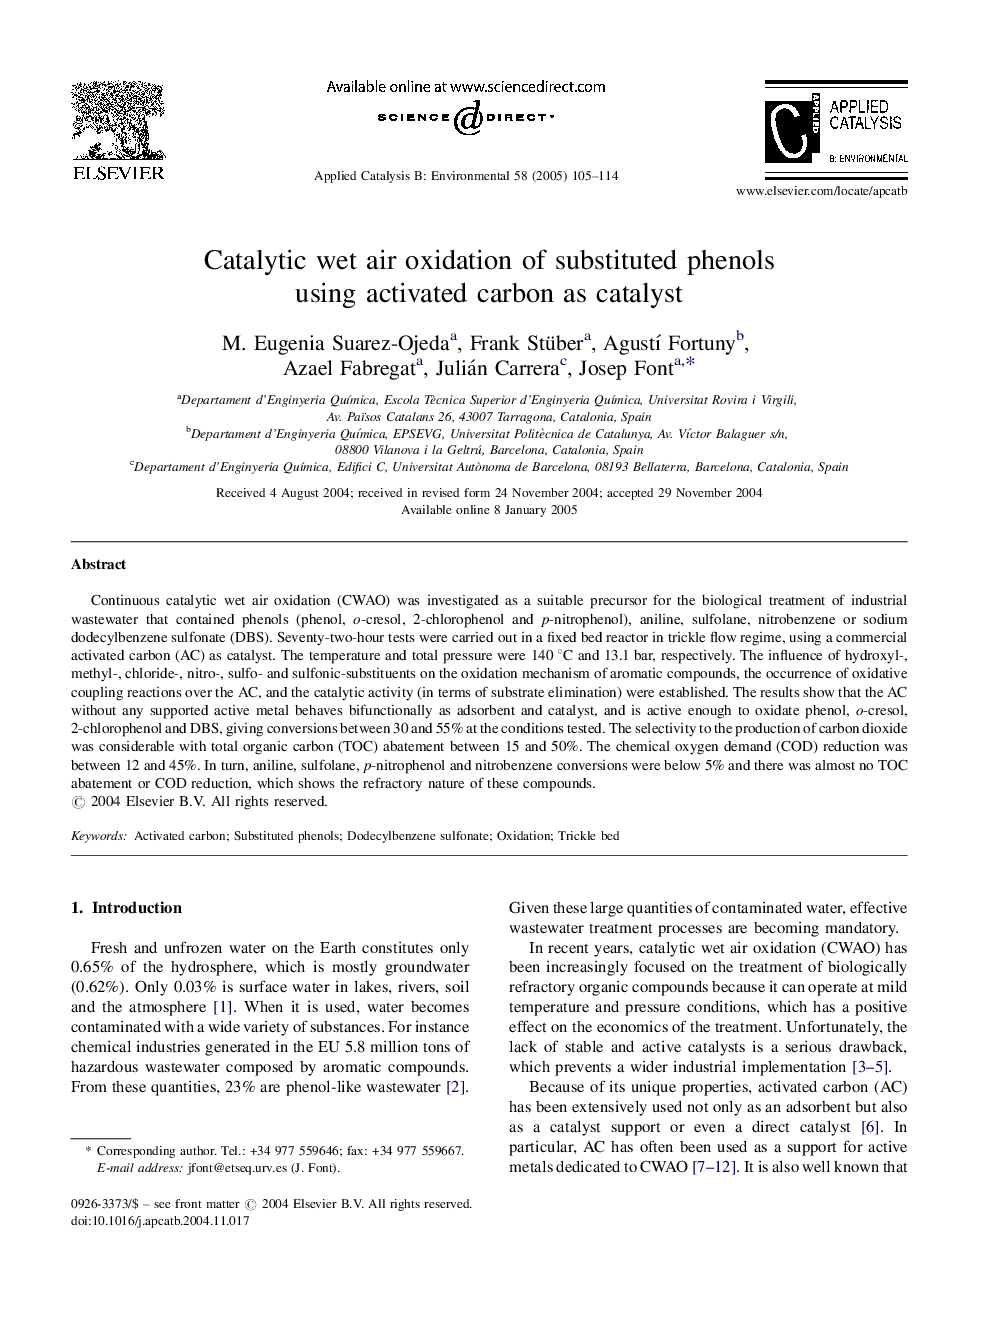 Catalytic wet air oxidation of substituted phenols using activated carbon as catalyst